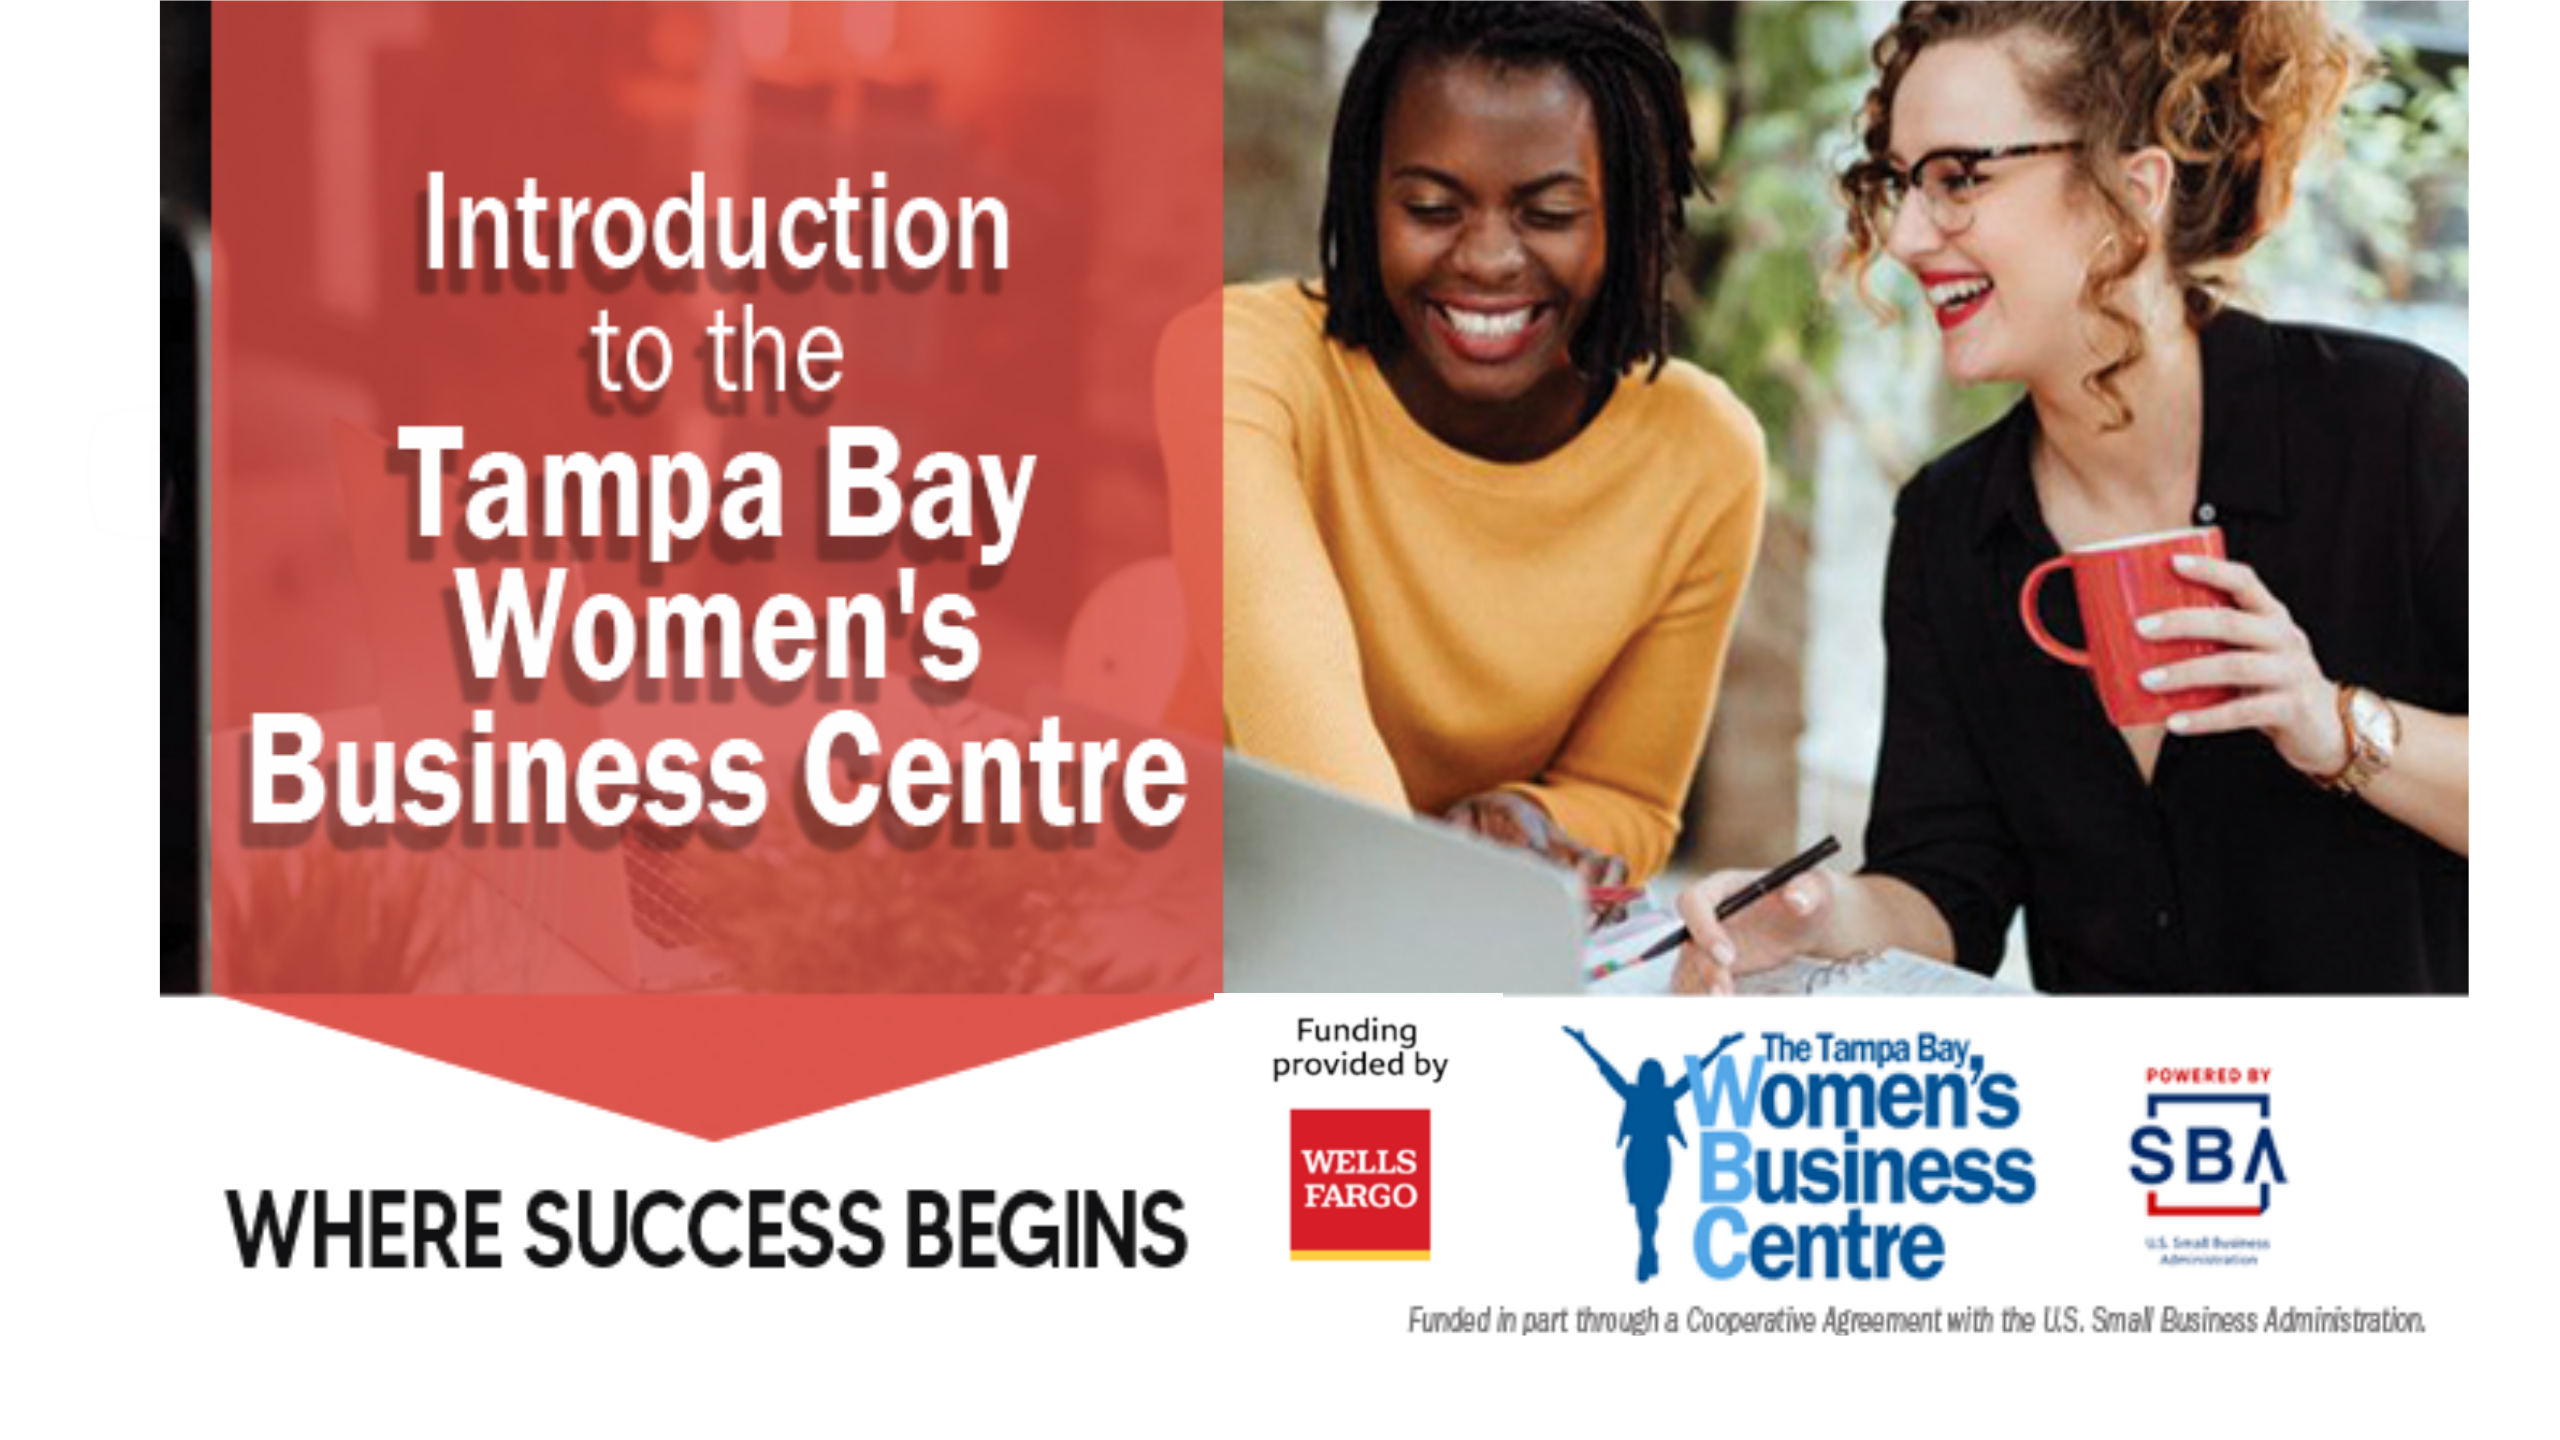 Introduction to the Tampa Bay Women's Business Centre